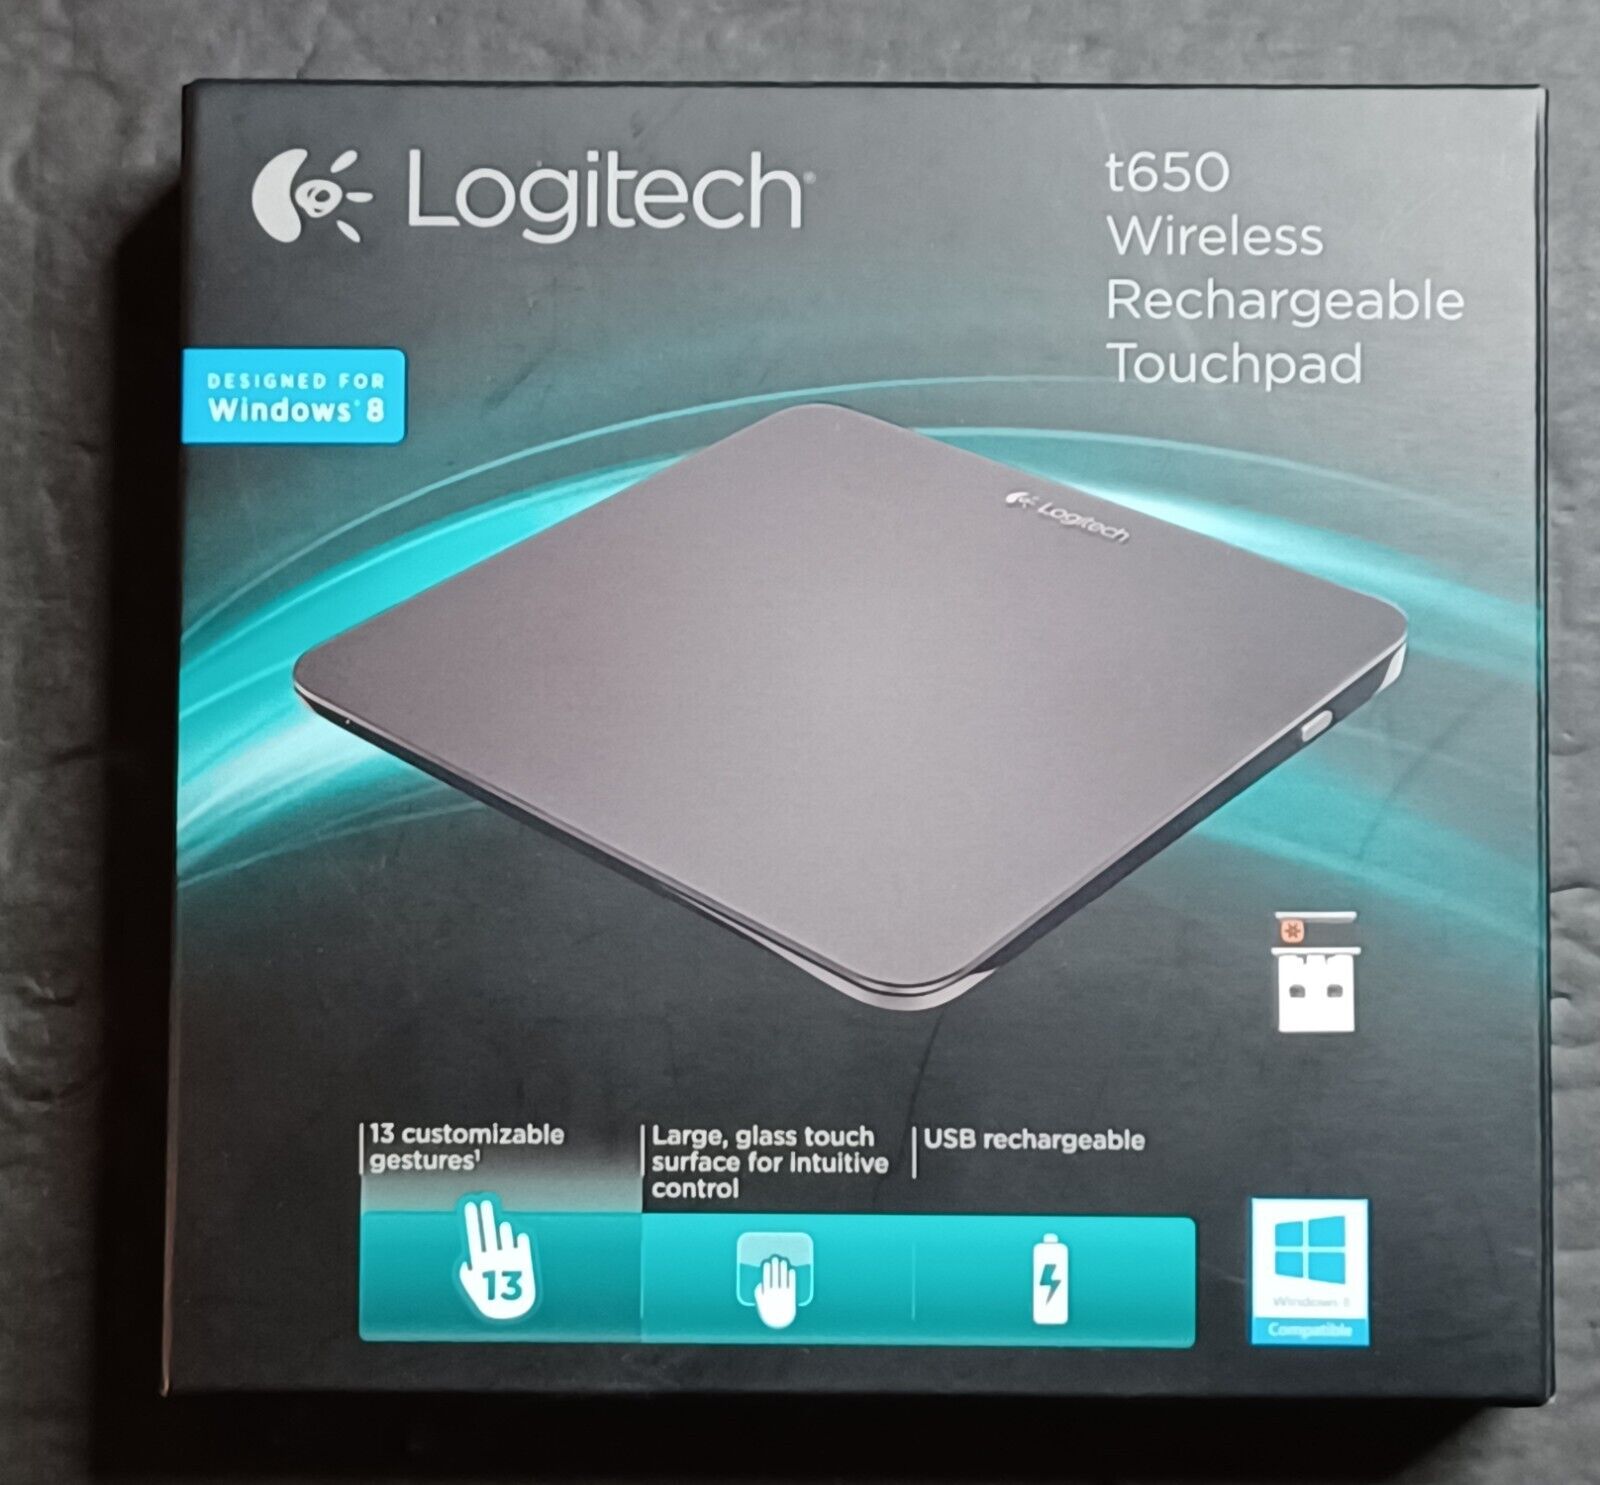 Logitech T650 Wireless Rechargeable Touchpad w/ Unifying Receiver Dongle & Cable